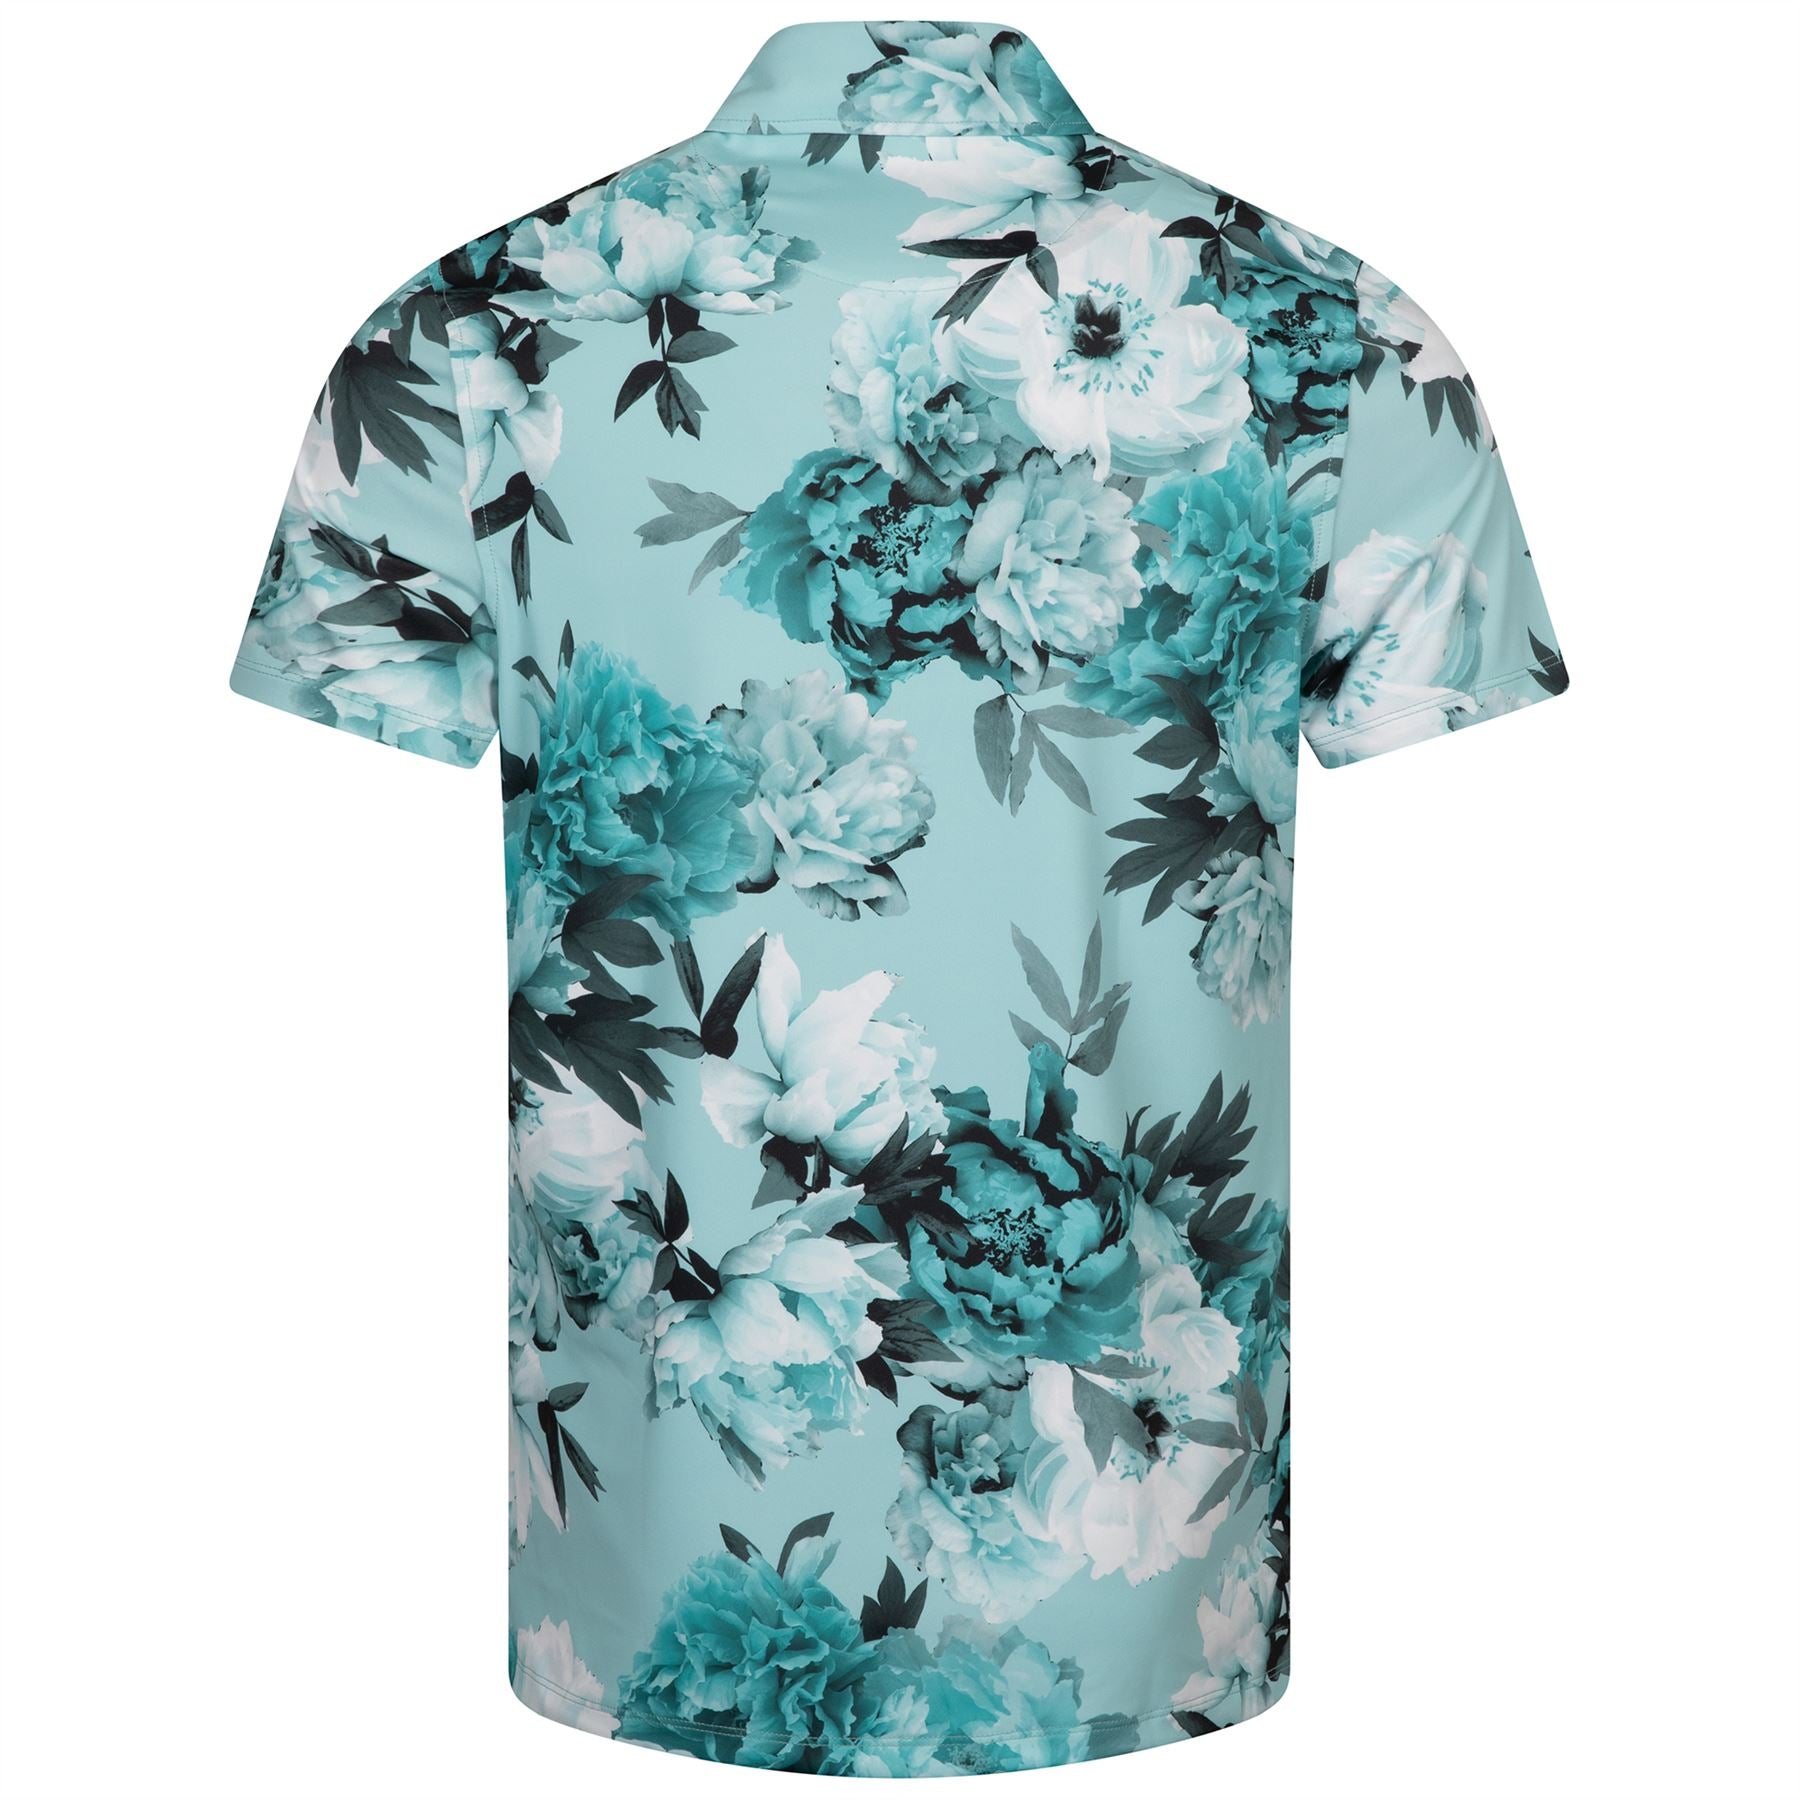 Messina - Multi Floral - Soft Jersey Polo Shirt Floral Print, Polo Shirts